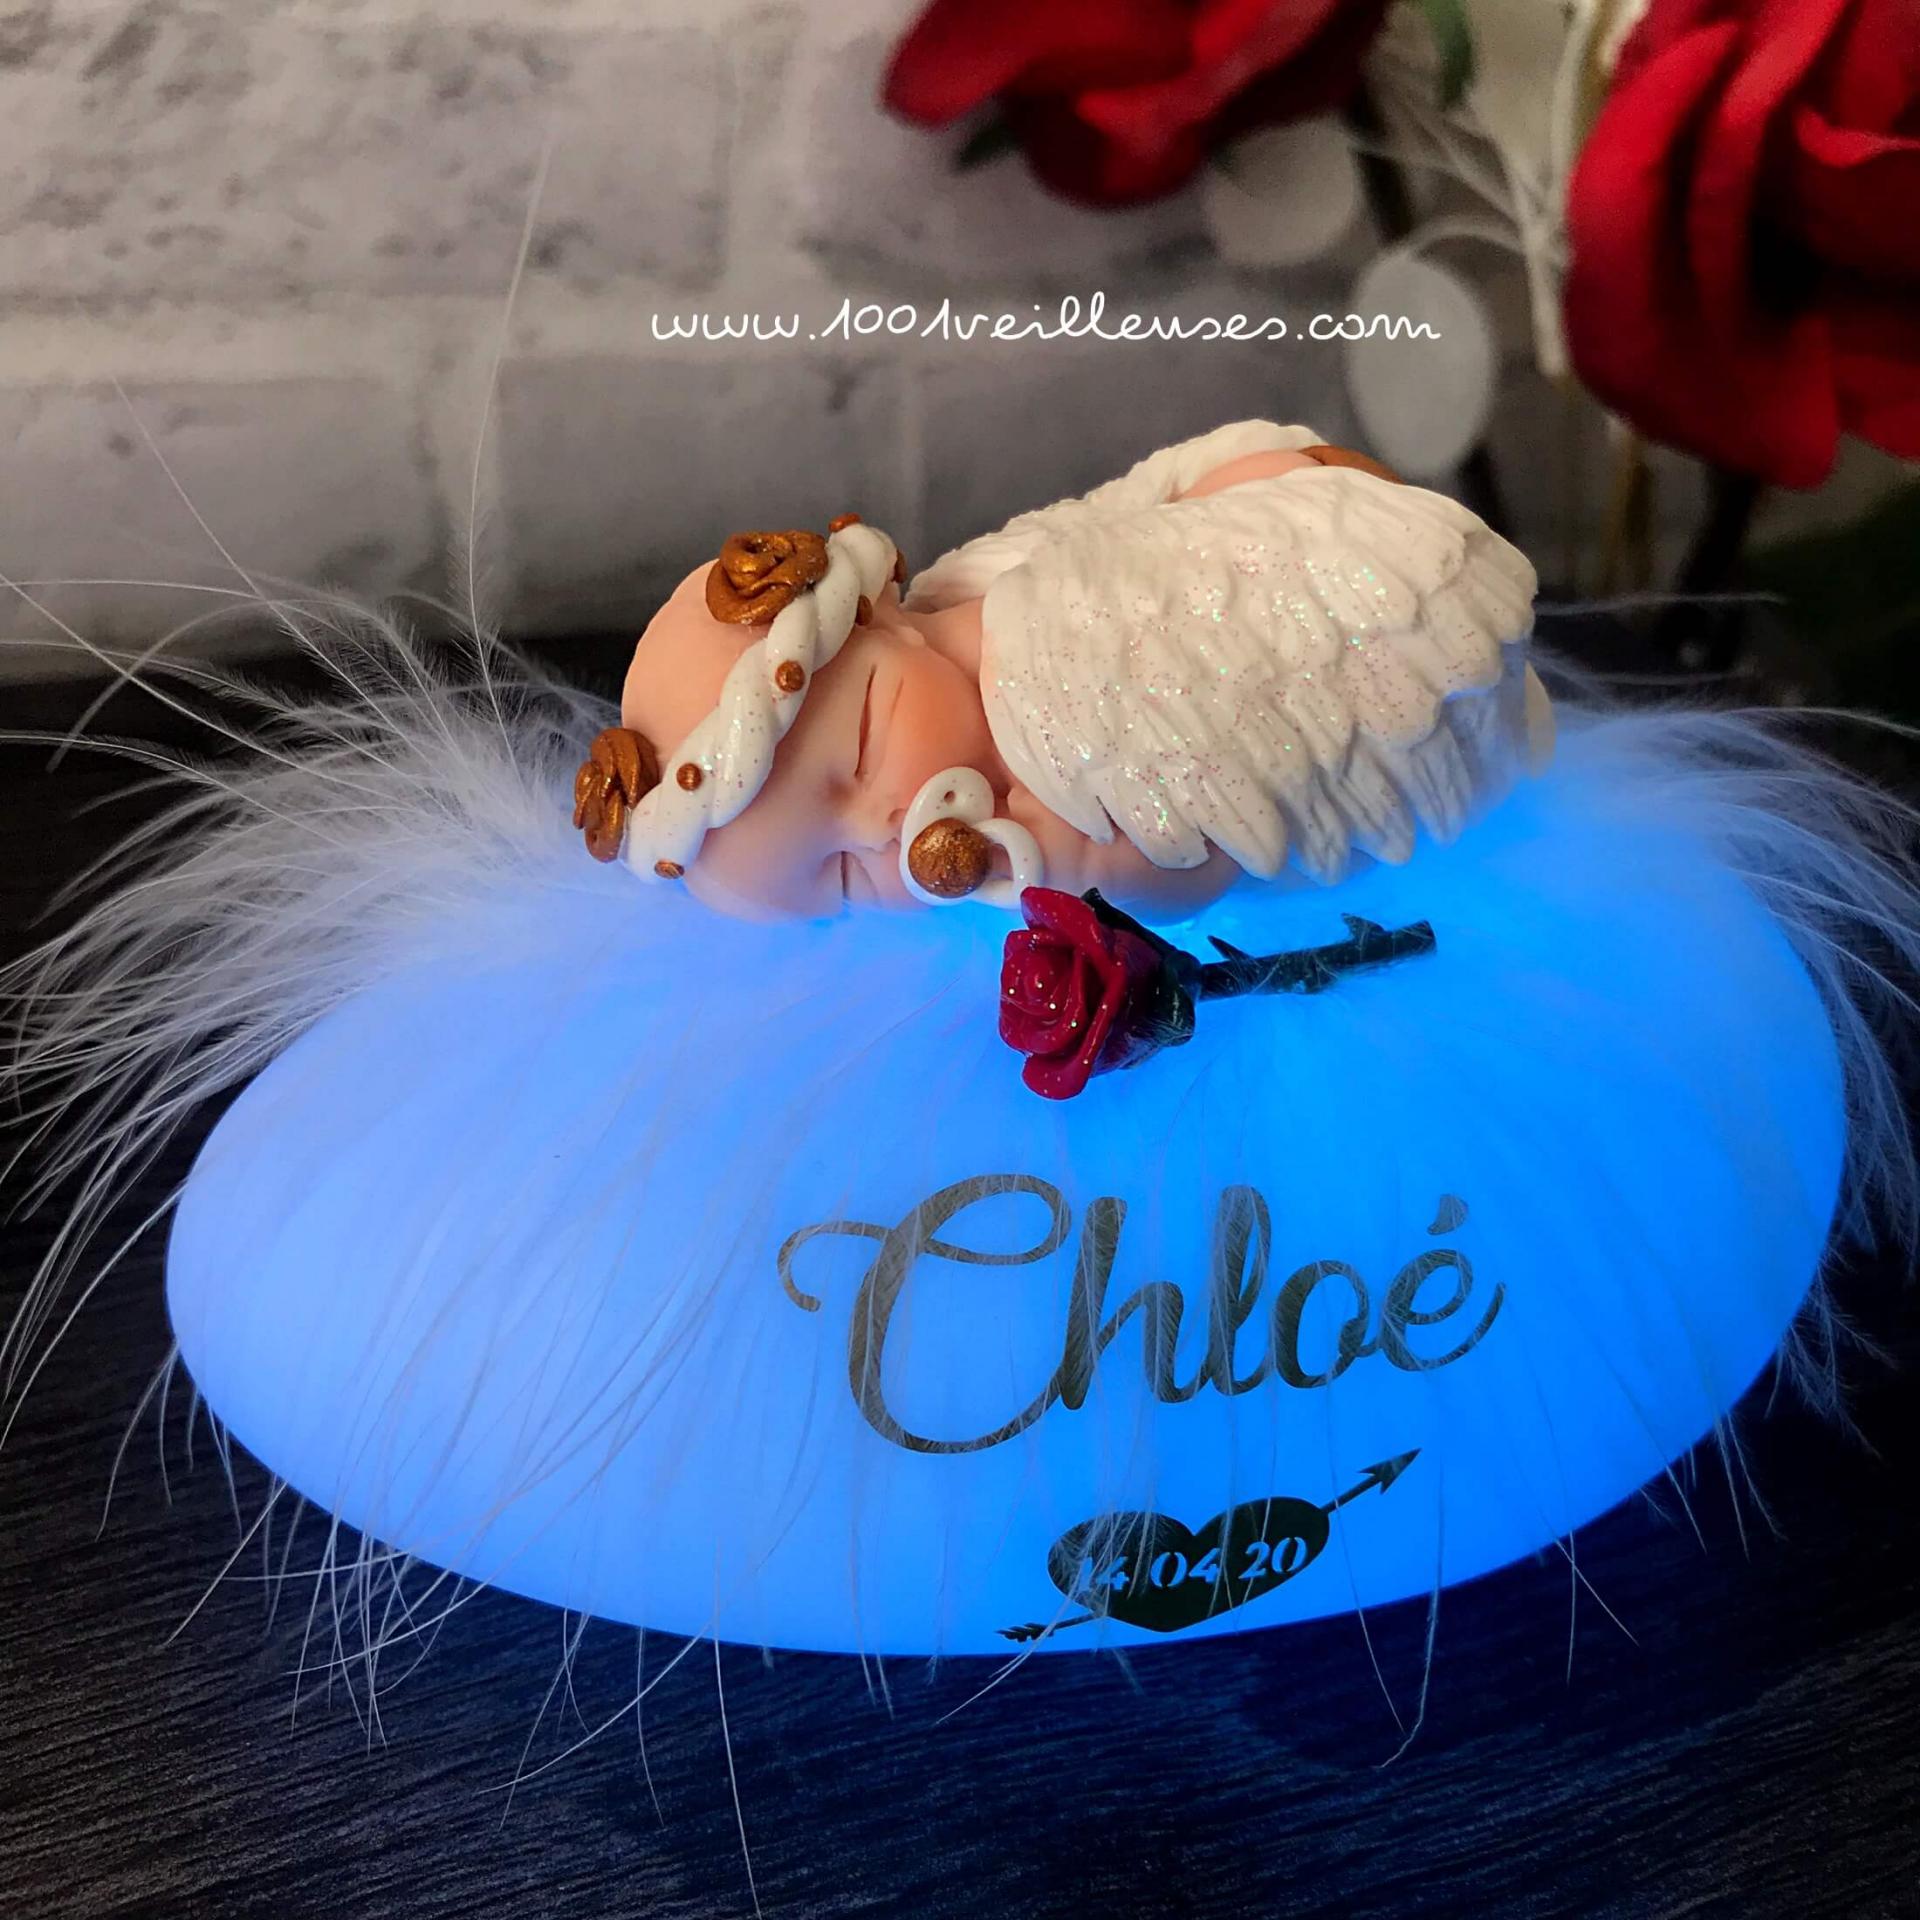 Personalized children's night light, hand-carved luminous pebble in polymer clay. Name, weight, date, and birth size engraved, lamp lit, angled view